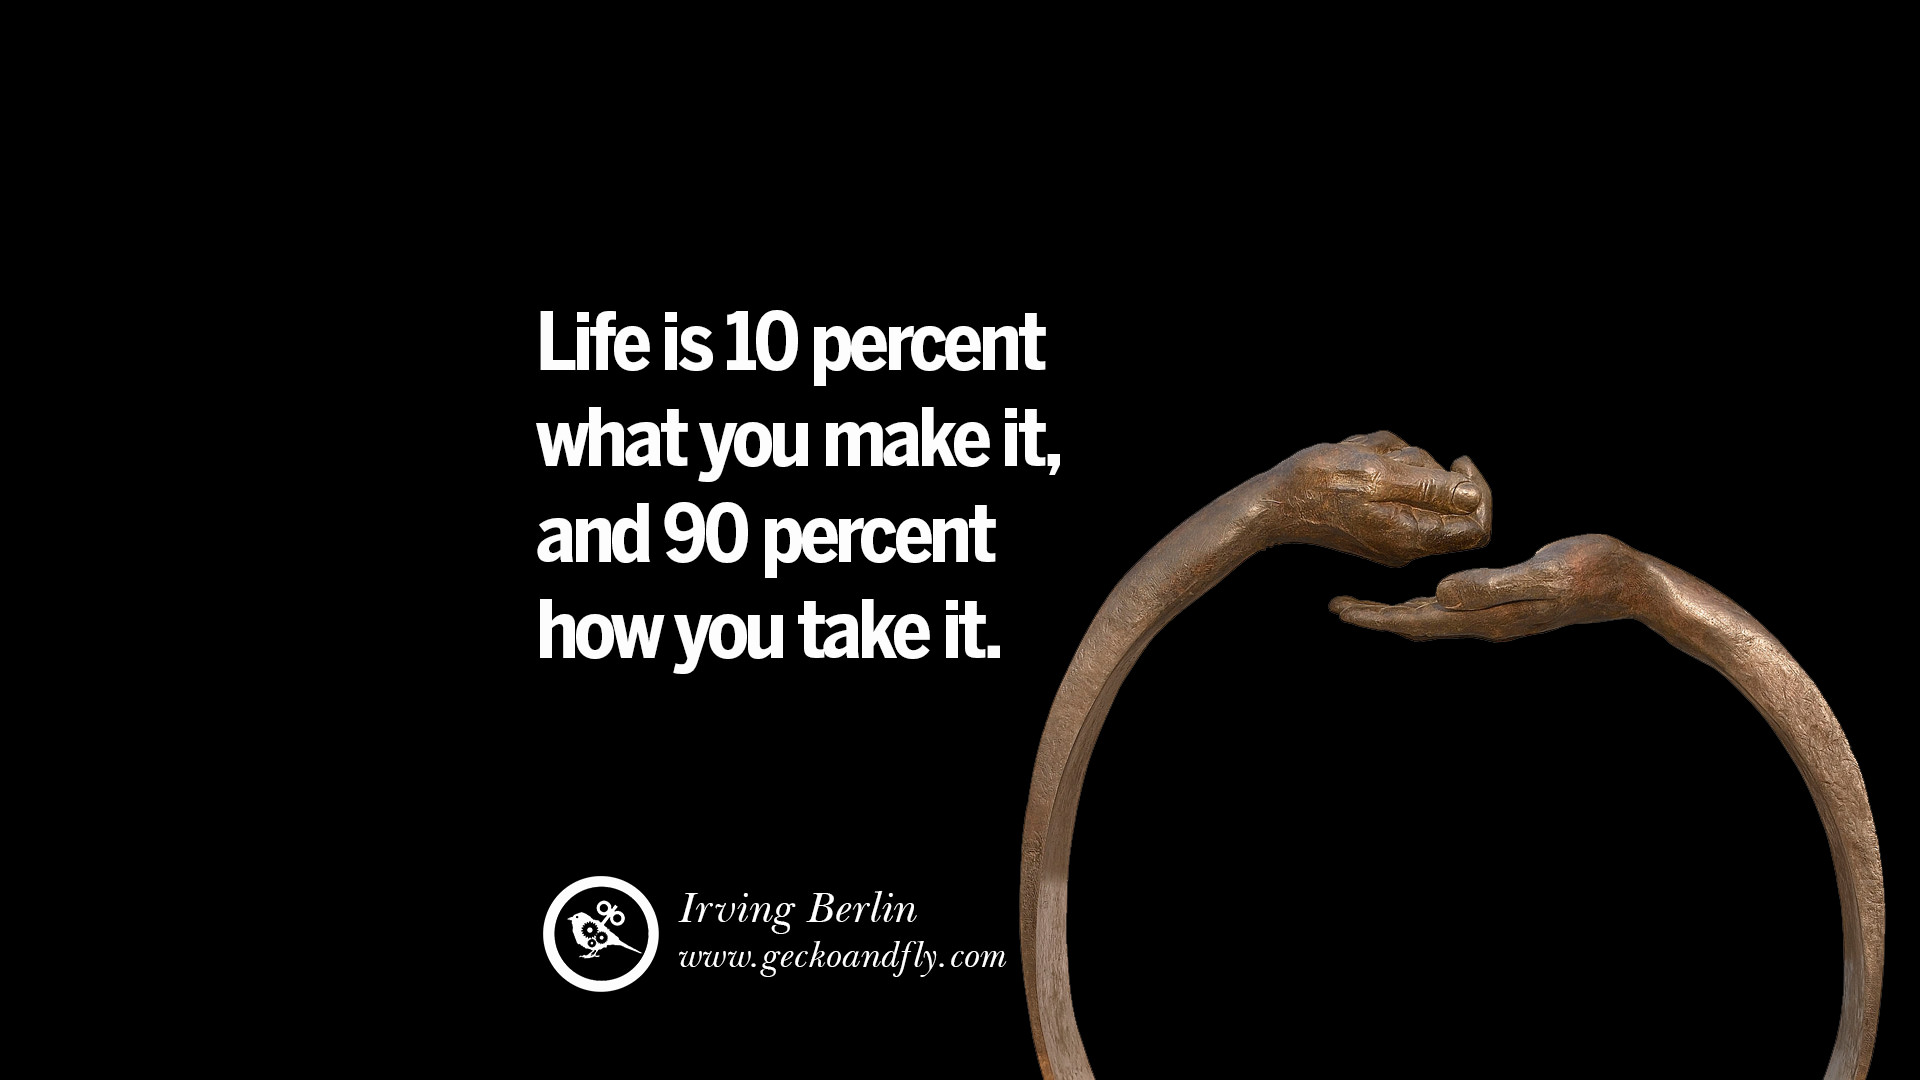 Life is 10 percent what you make it and 90 percent how you take it